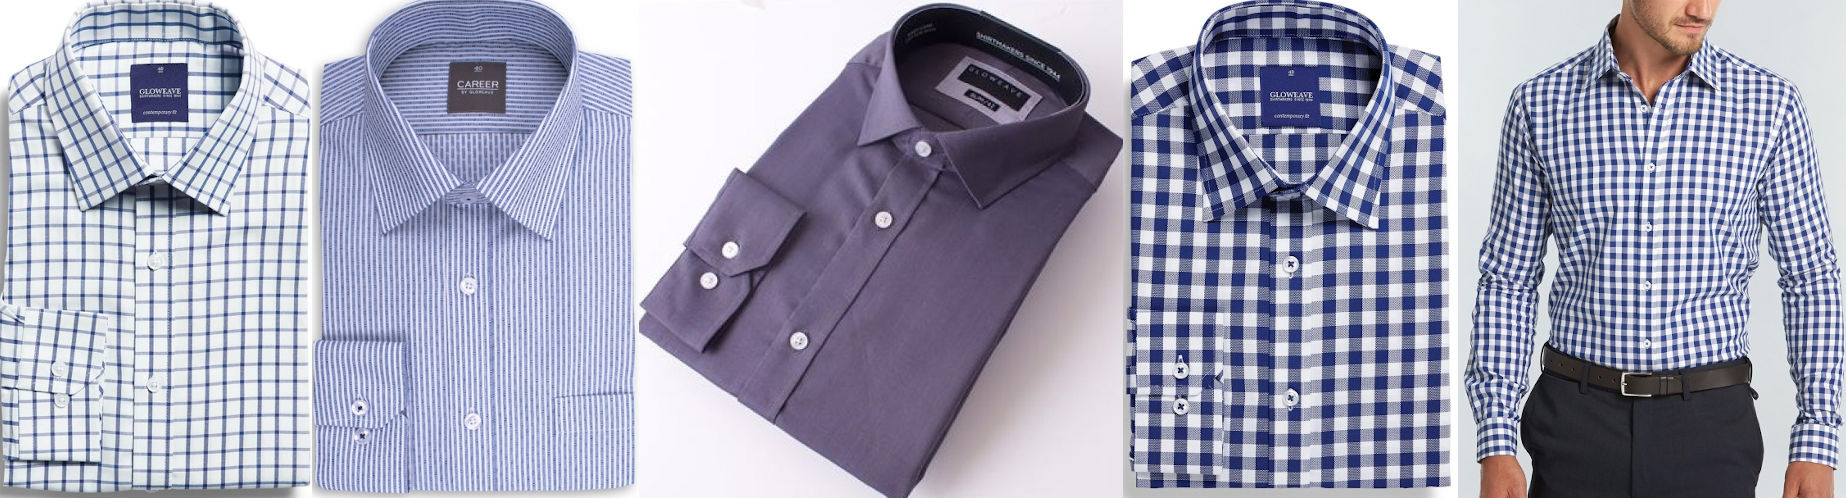 Gloweave Shirts for Business Save up to 25% and shop online